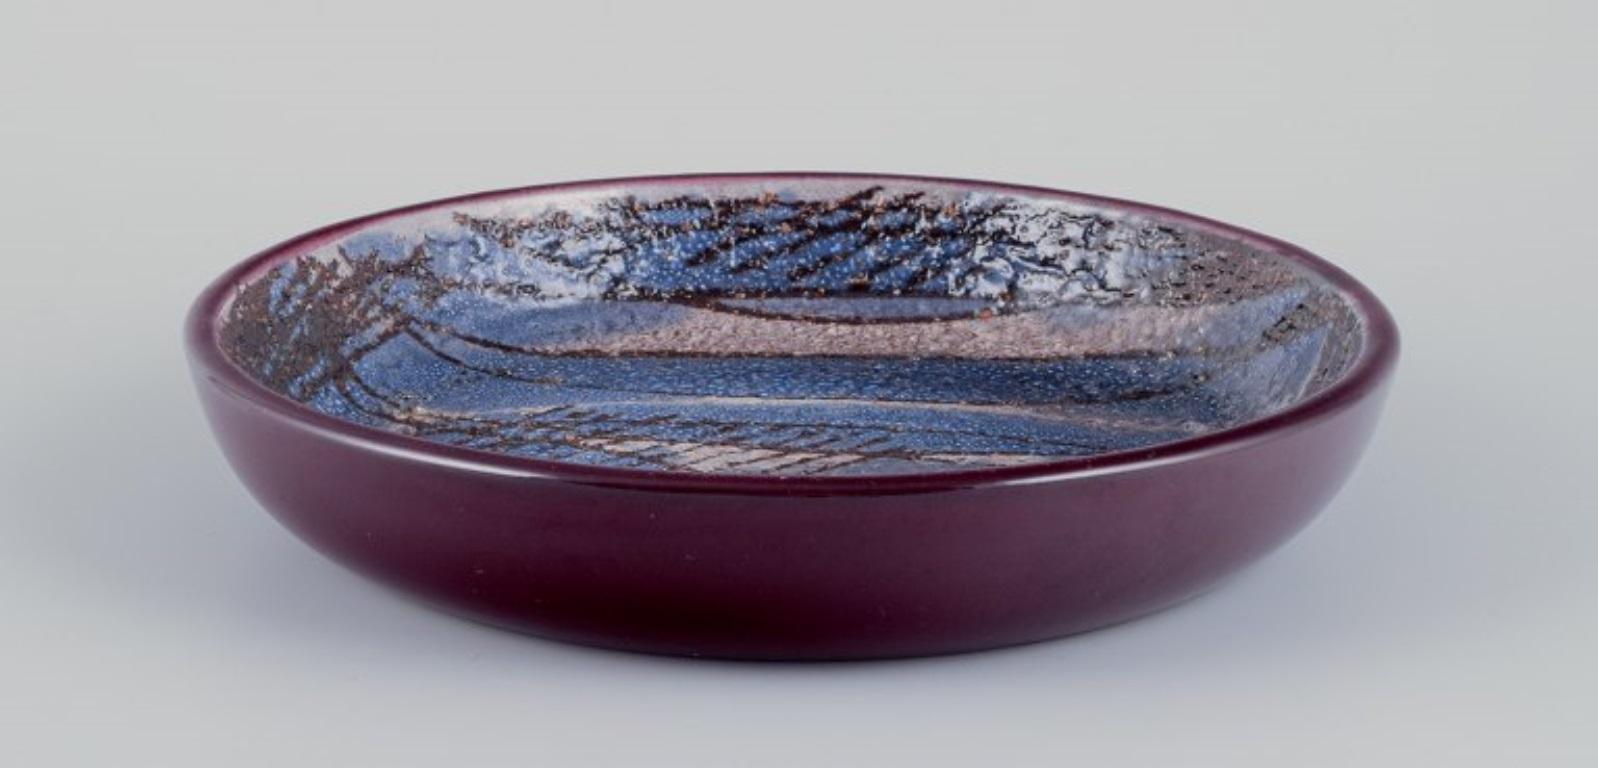 Glazed Ingrid Atterberg for Upsala Ekeby. Low ceramic bowl with abstract design. For Sale